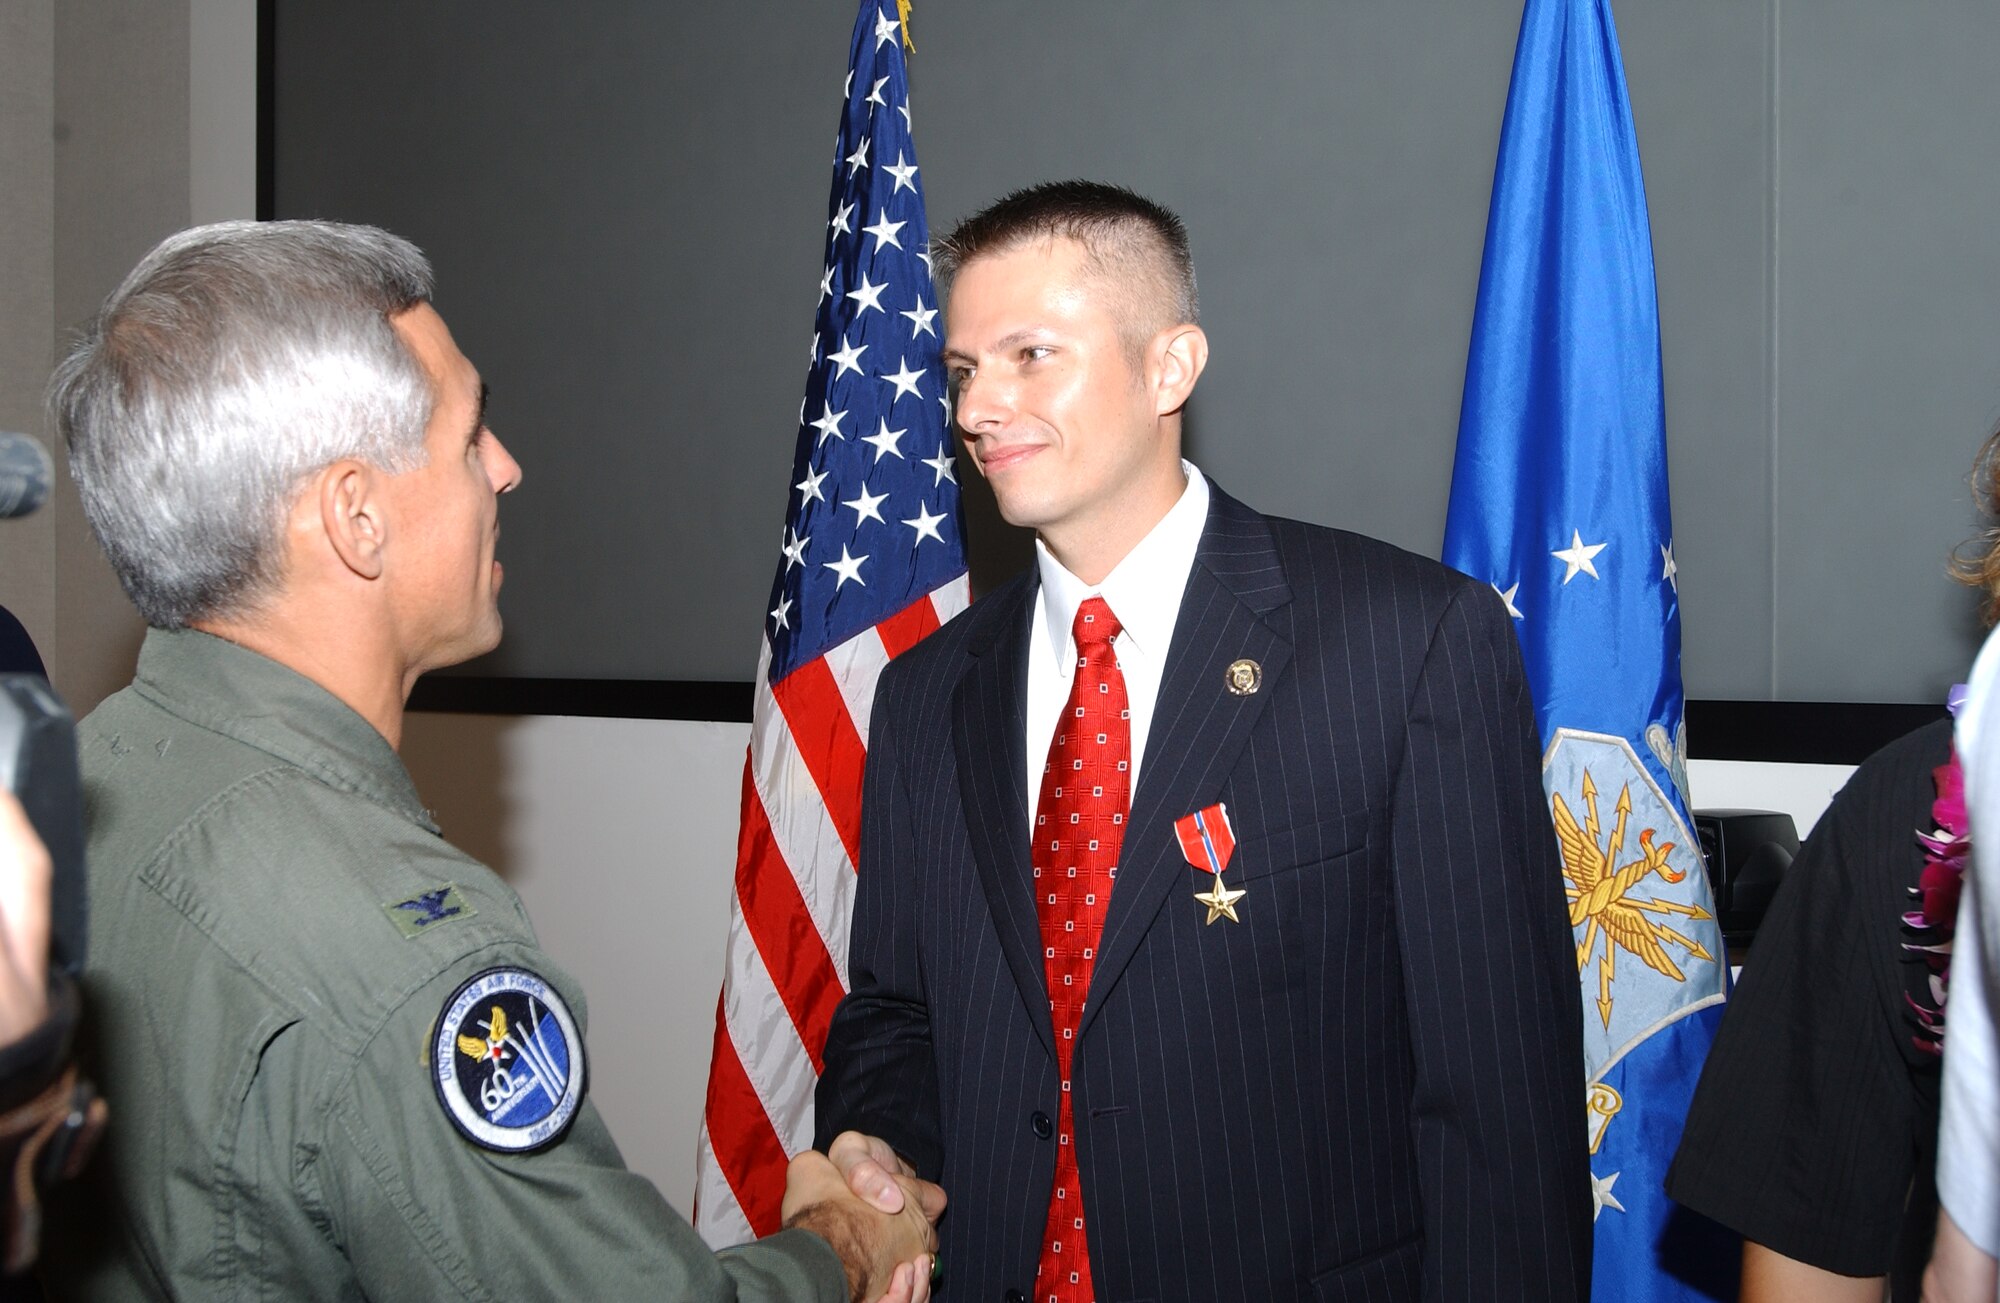 Col. J.J. Torres, 15th Airlift Wing commander, thanks Special Agent Gregory Carmack for his service, after the Bronze Star presentation ceremony.